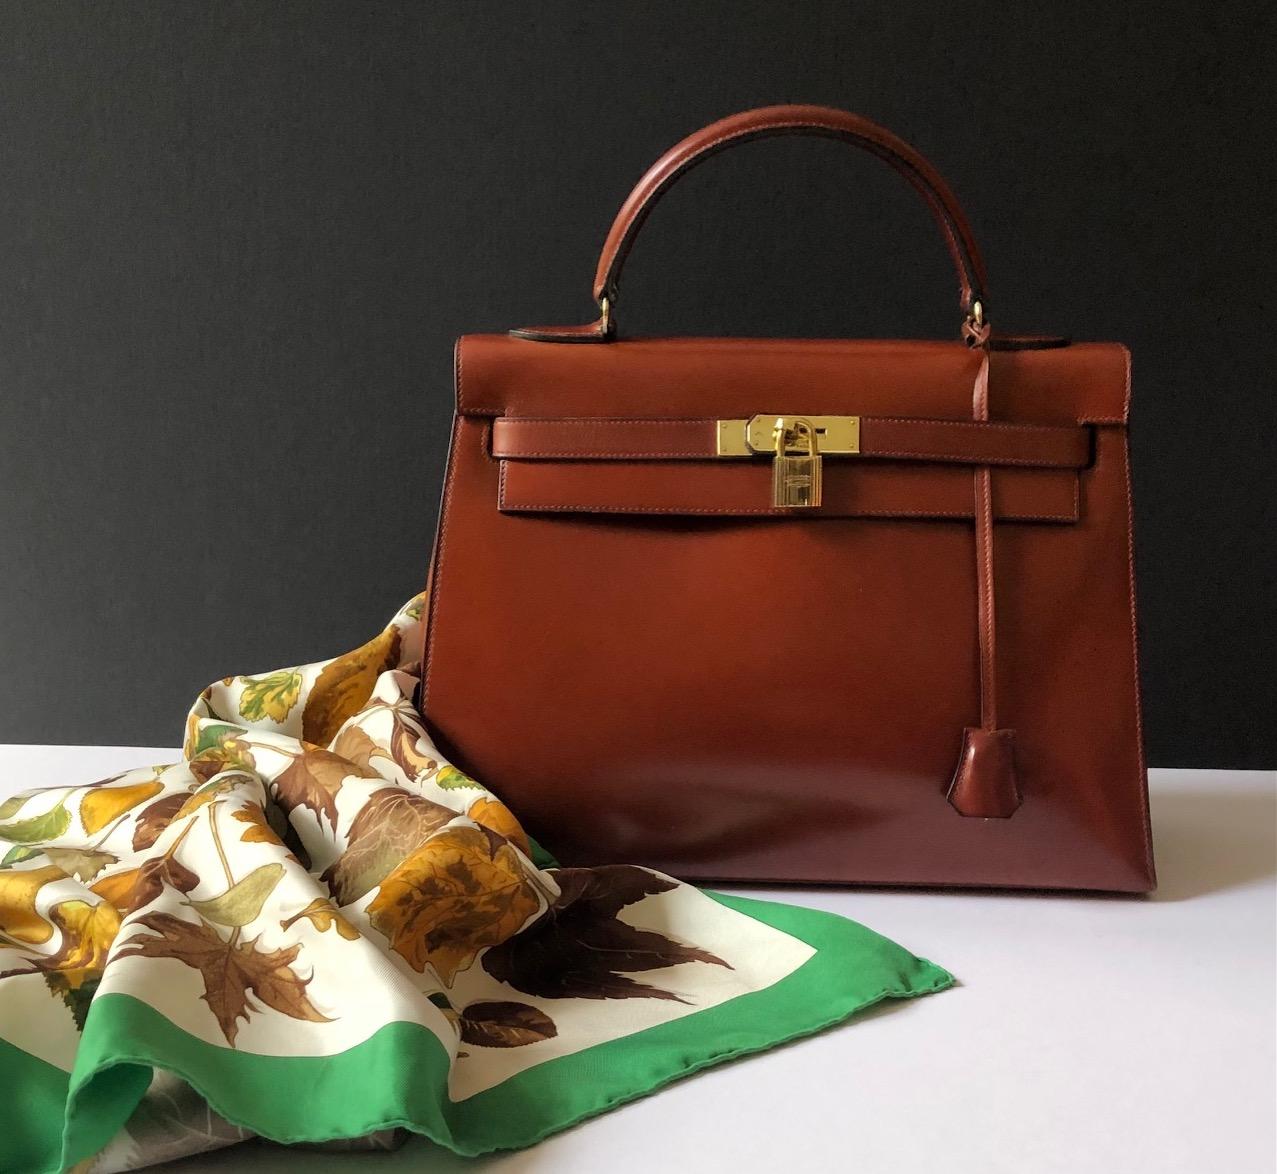 HERMÈS Vintage Kelly 32 Box Calf Sellier Leather Gold Hardware Cognac Iconic Bag C.1970 W/Box
A stunning collectable iconic ultra rare vintage 1970 Kelly 32 Cognac colour handbag. Considering it’s 53 years old age this Kelly bag is in very good